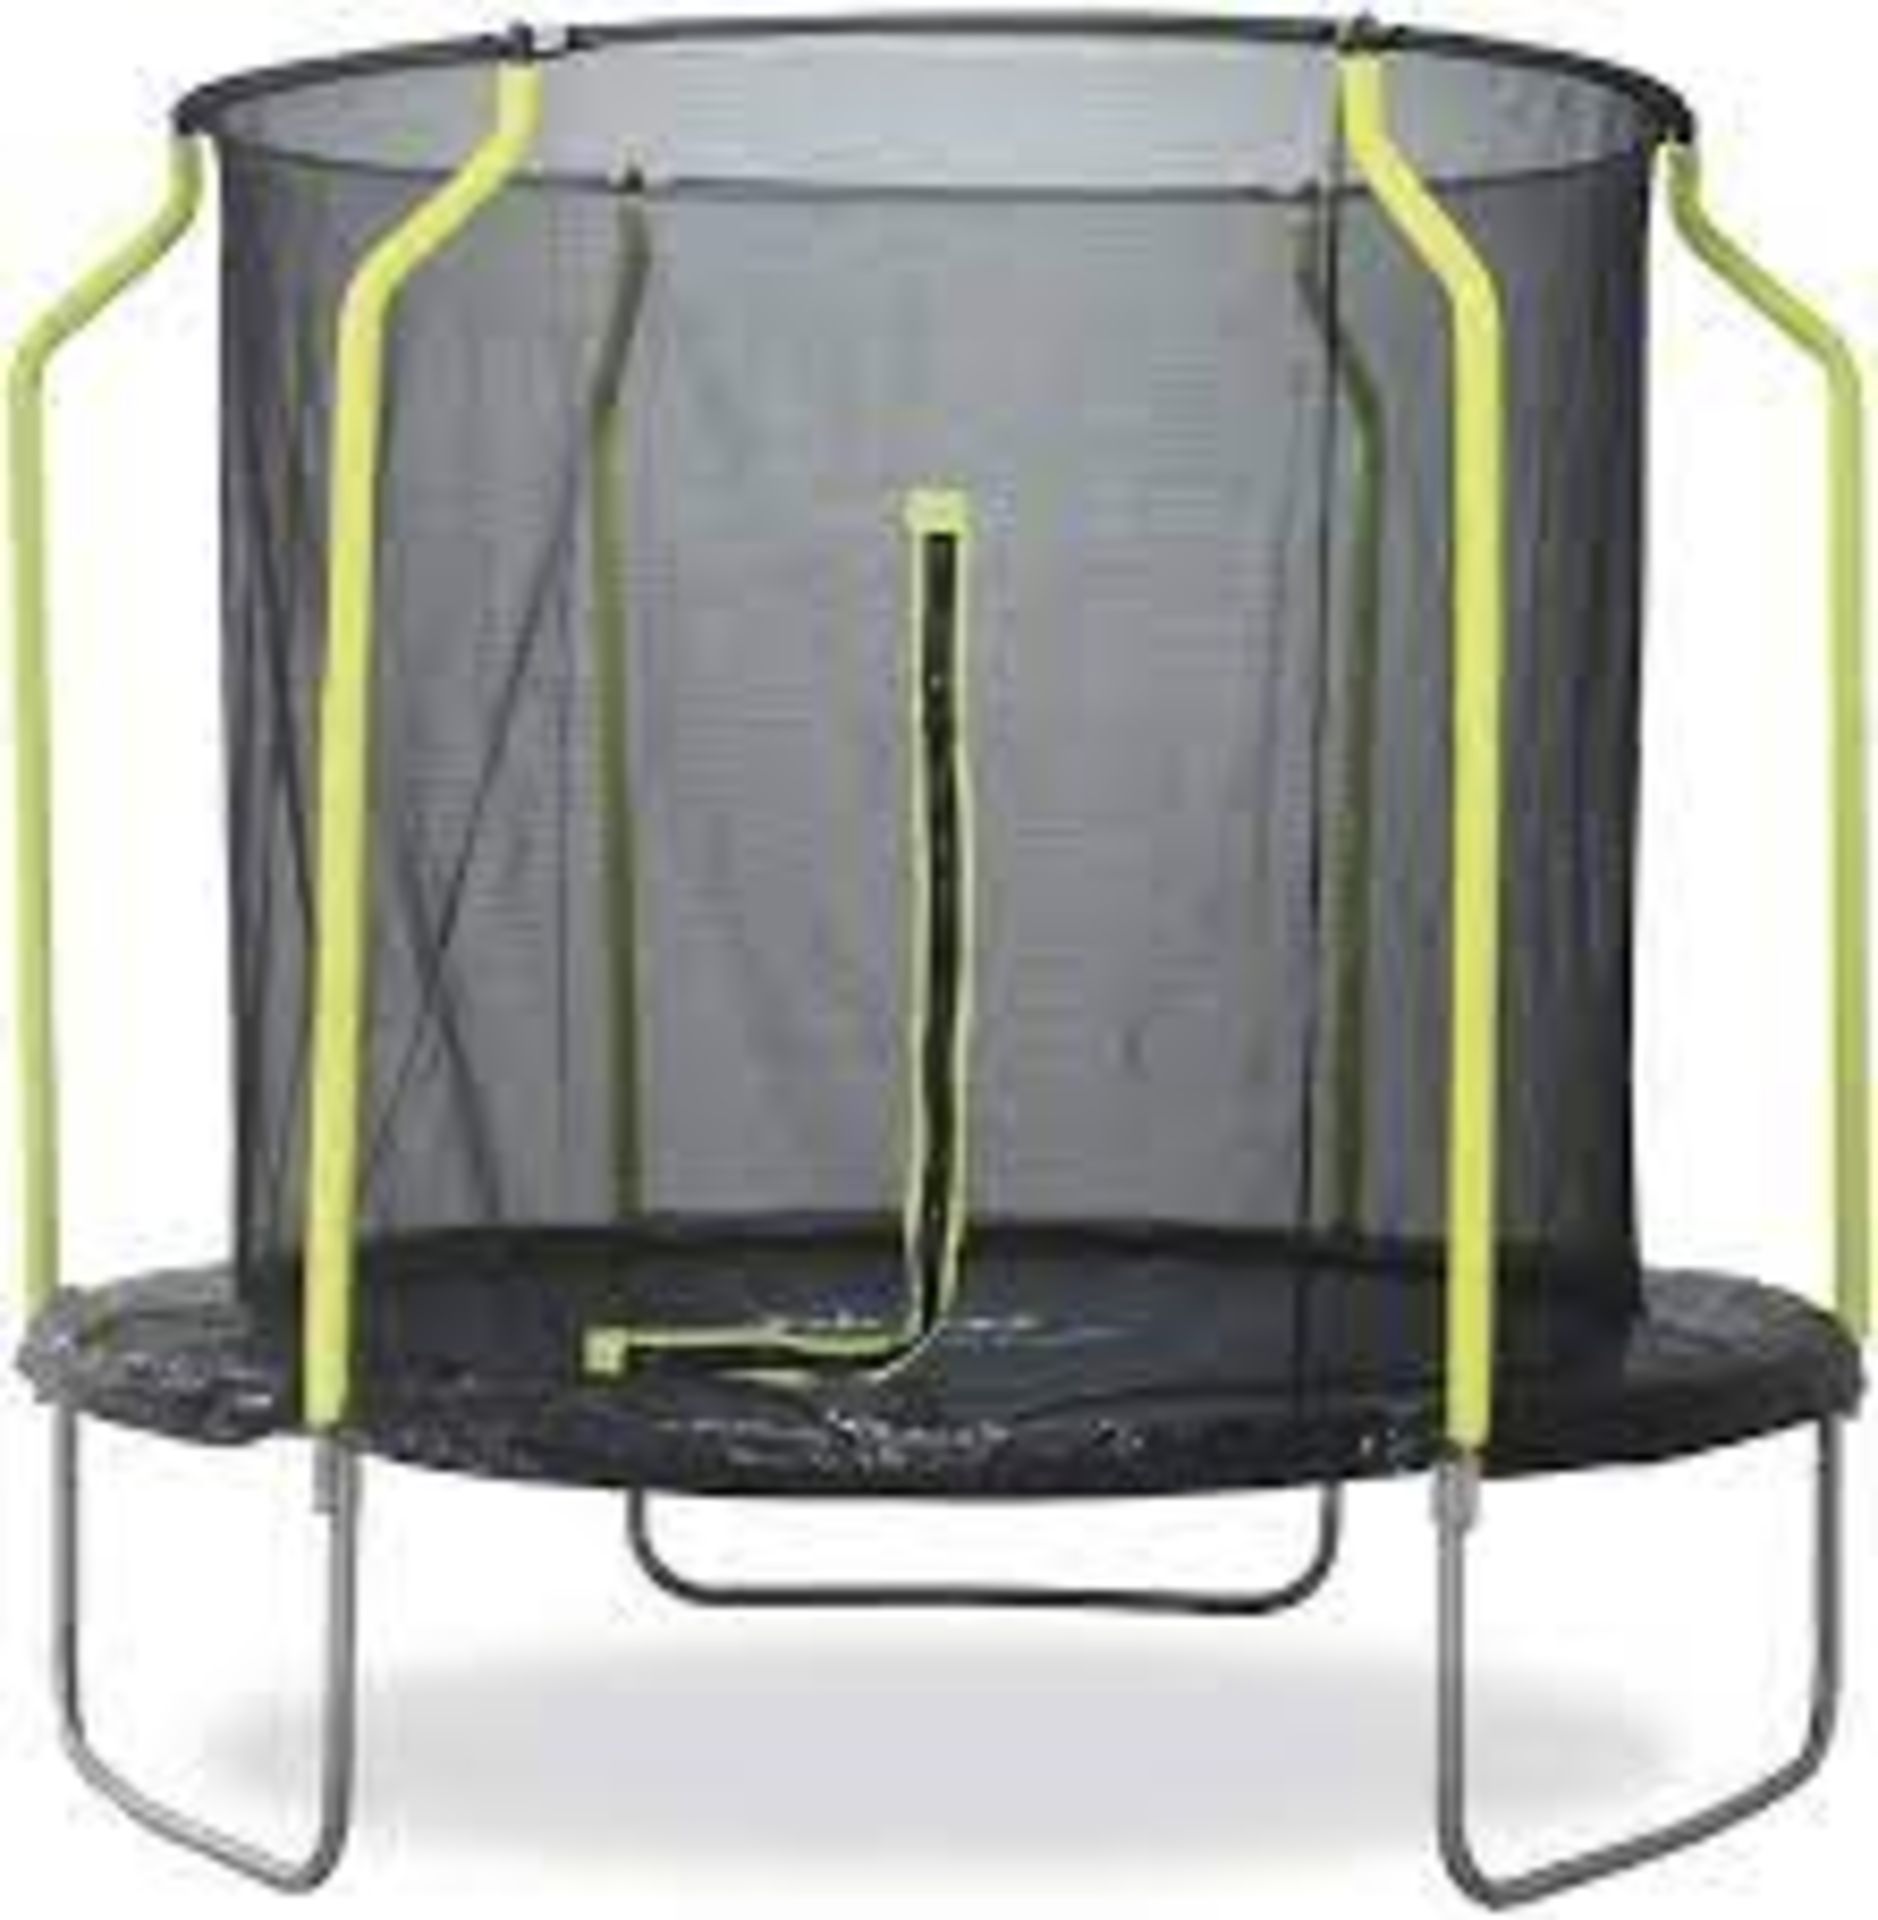 BRAND NEW PLUMB WAVE SPRINGSAFE 8FT TRAMPOLINE AND ENCLOSURE RRP £389 R17